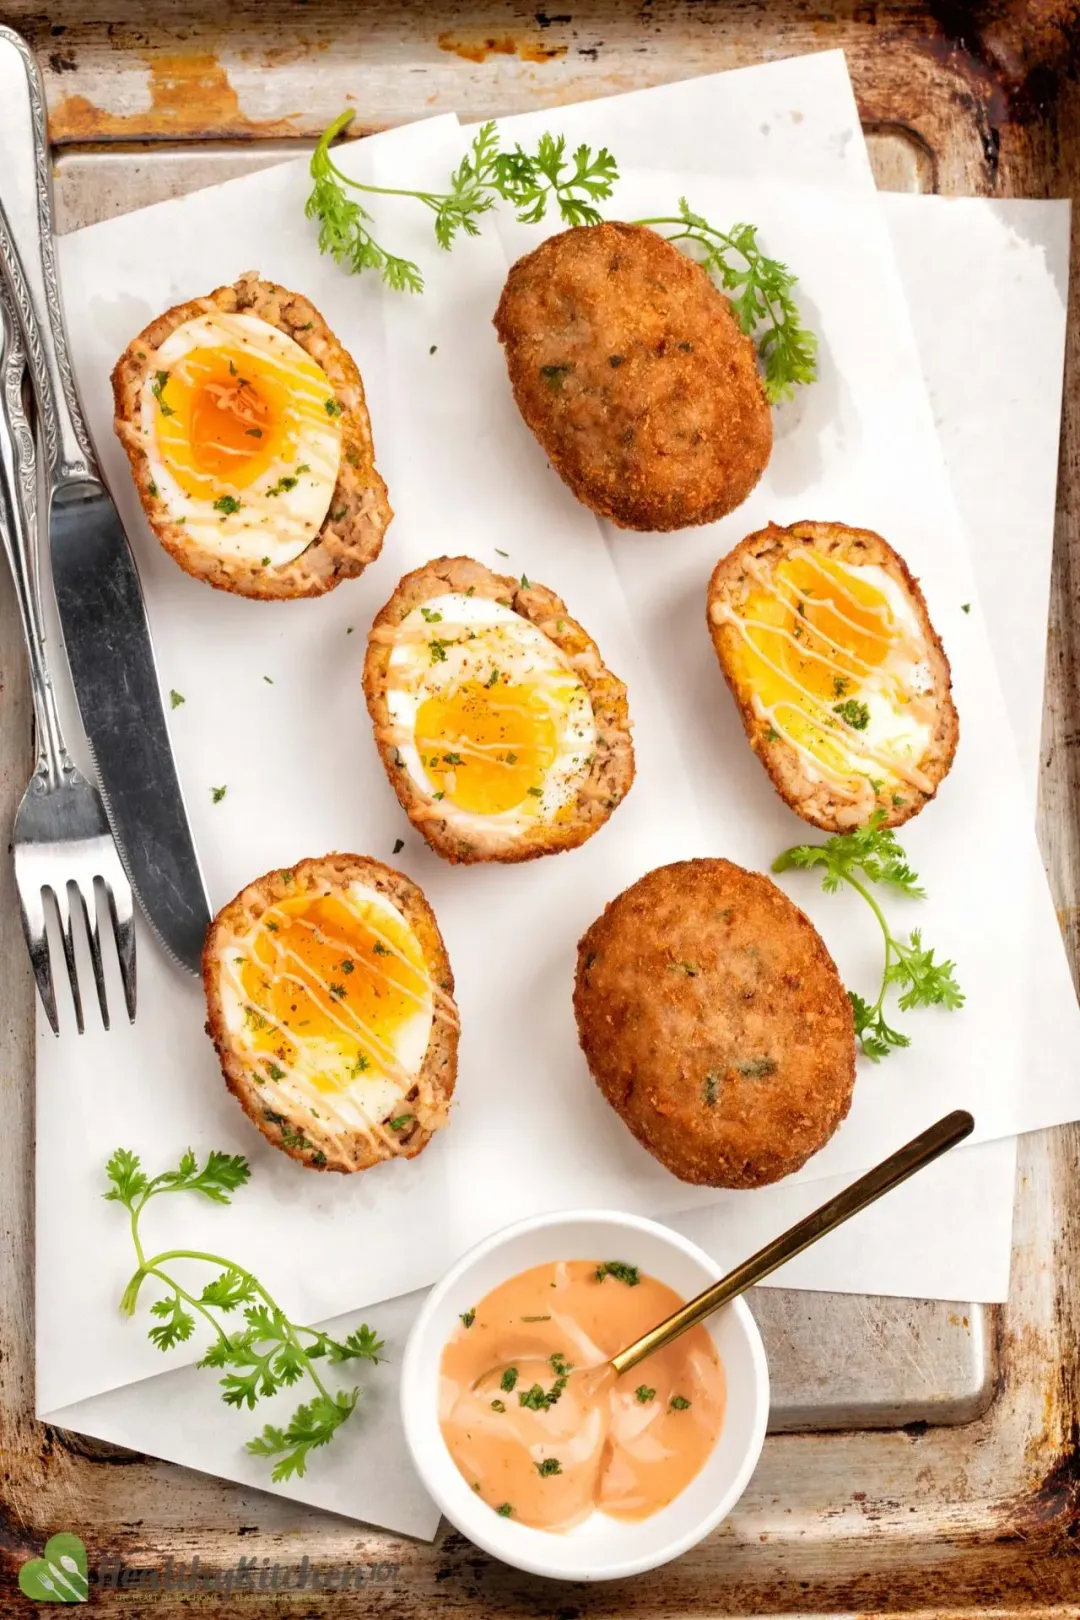 What to Serve with Scotch Eggs